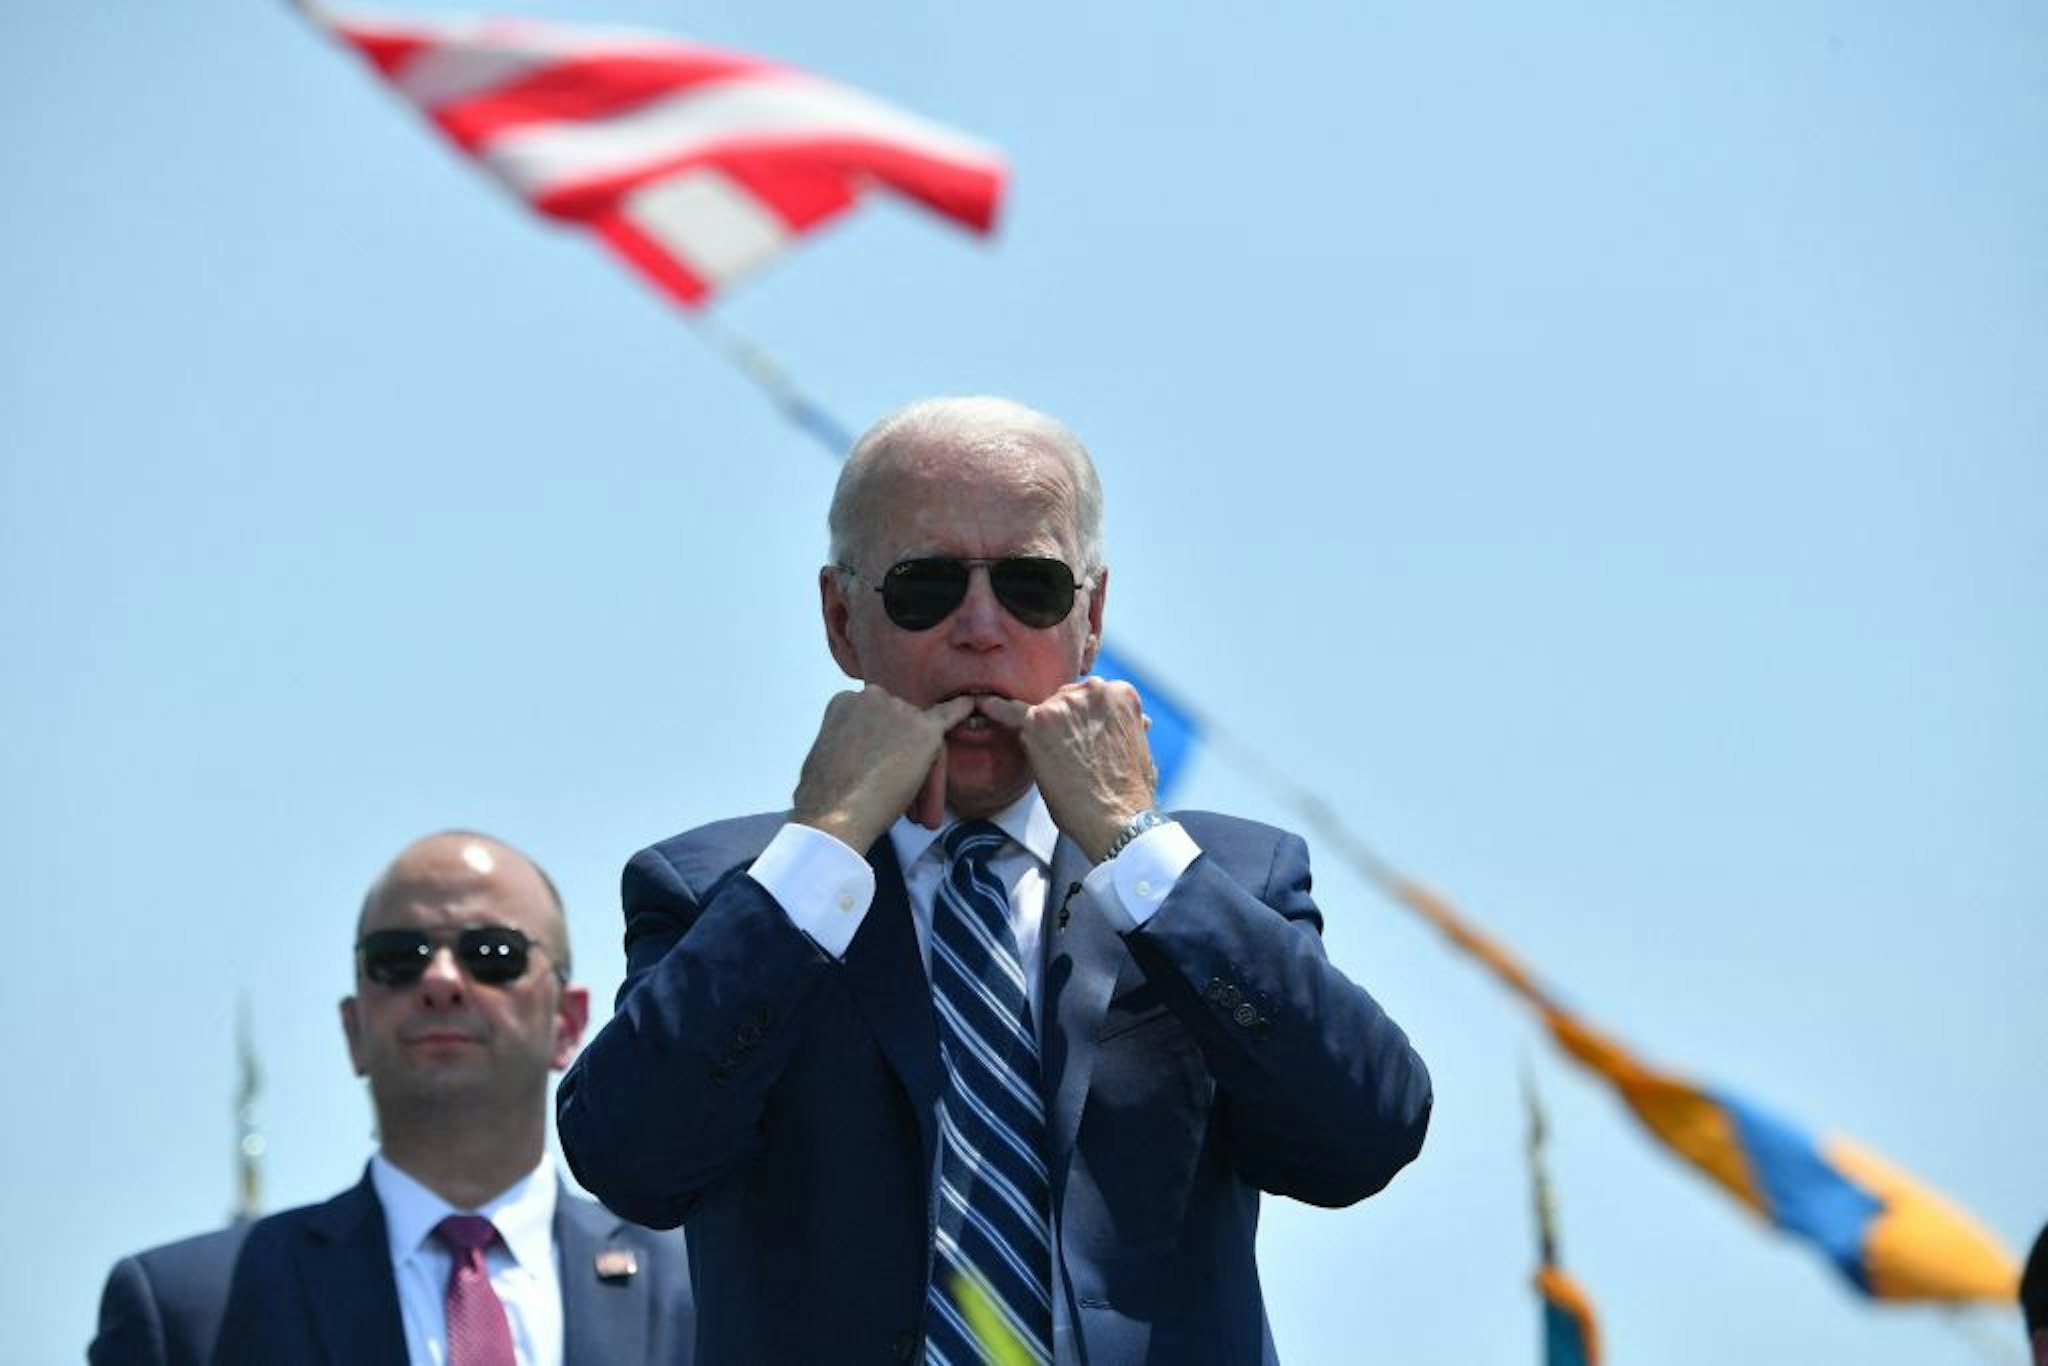 US President Joe Biden whistles during the US Coast Guard Academys 140th commencement exercises on May 19, 2021 in New London, Connecticut.